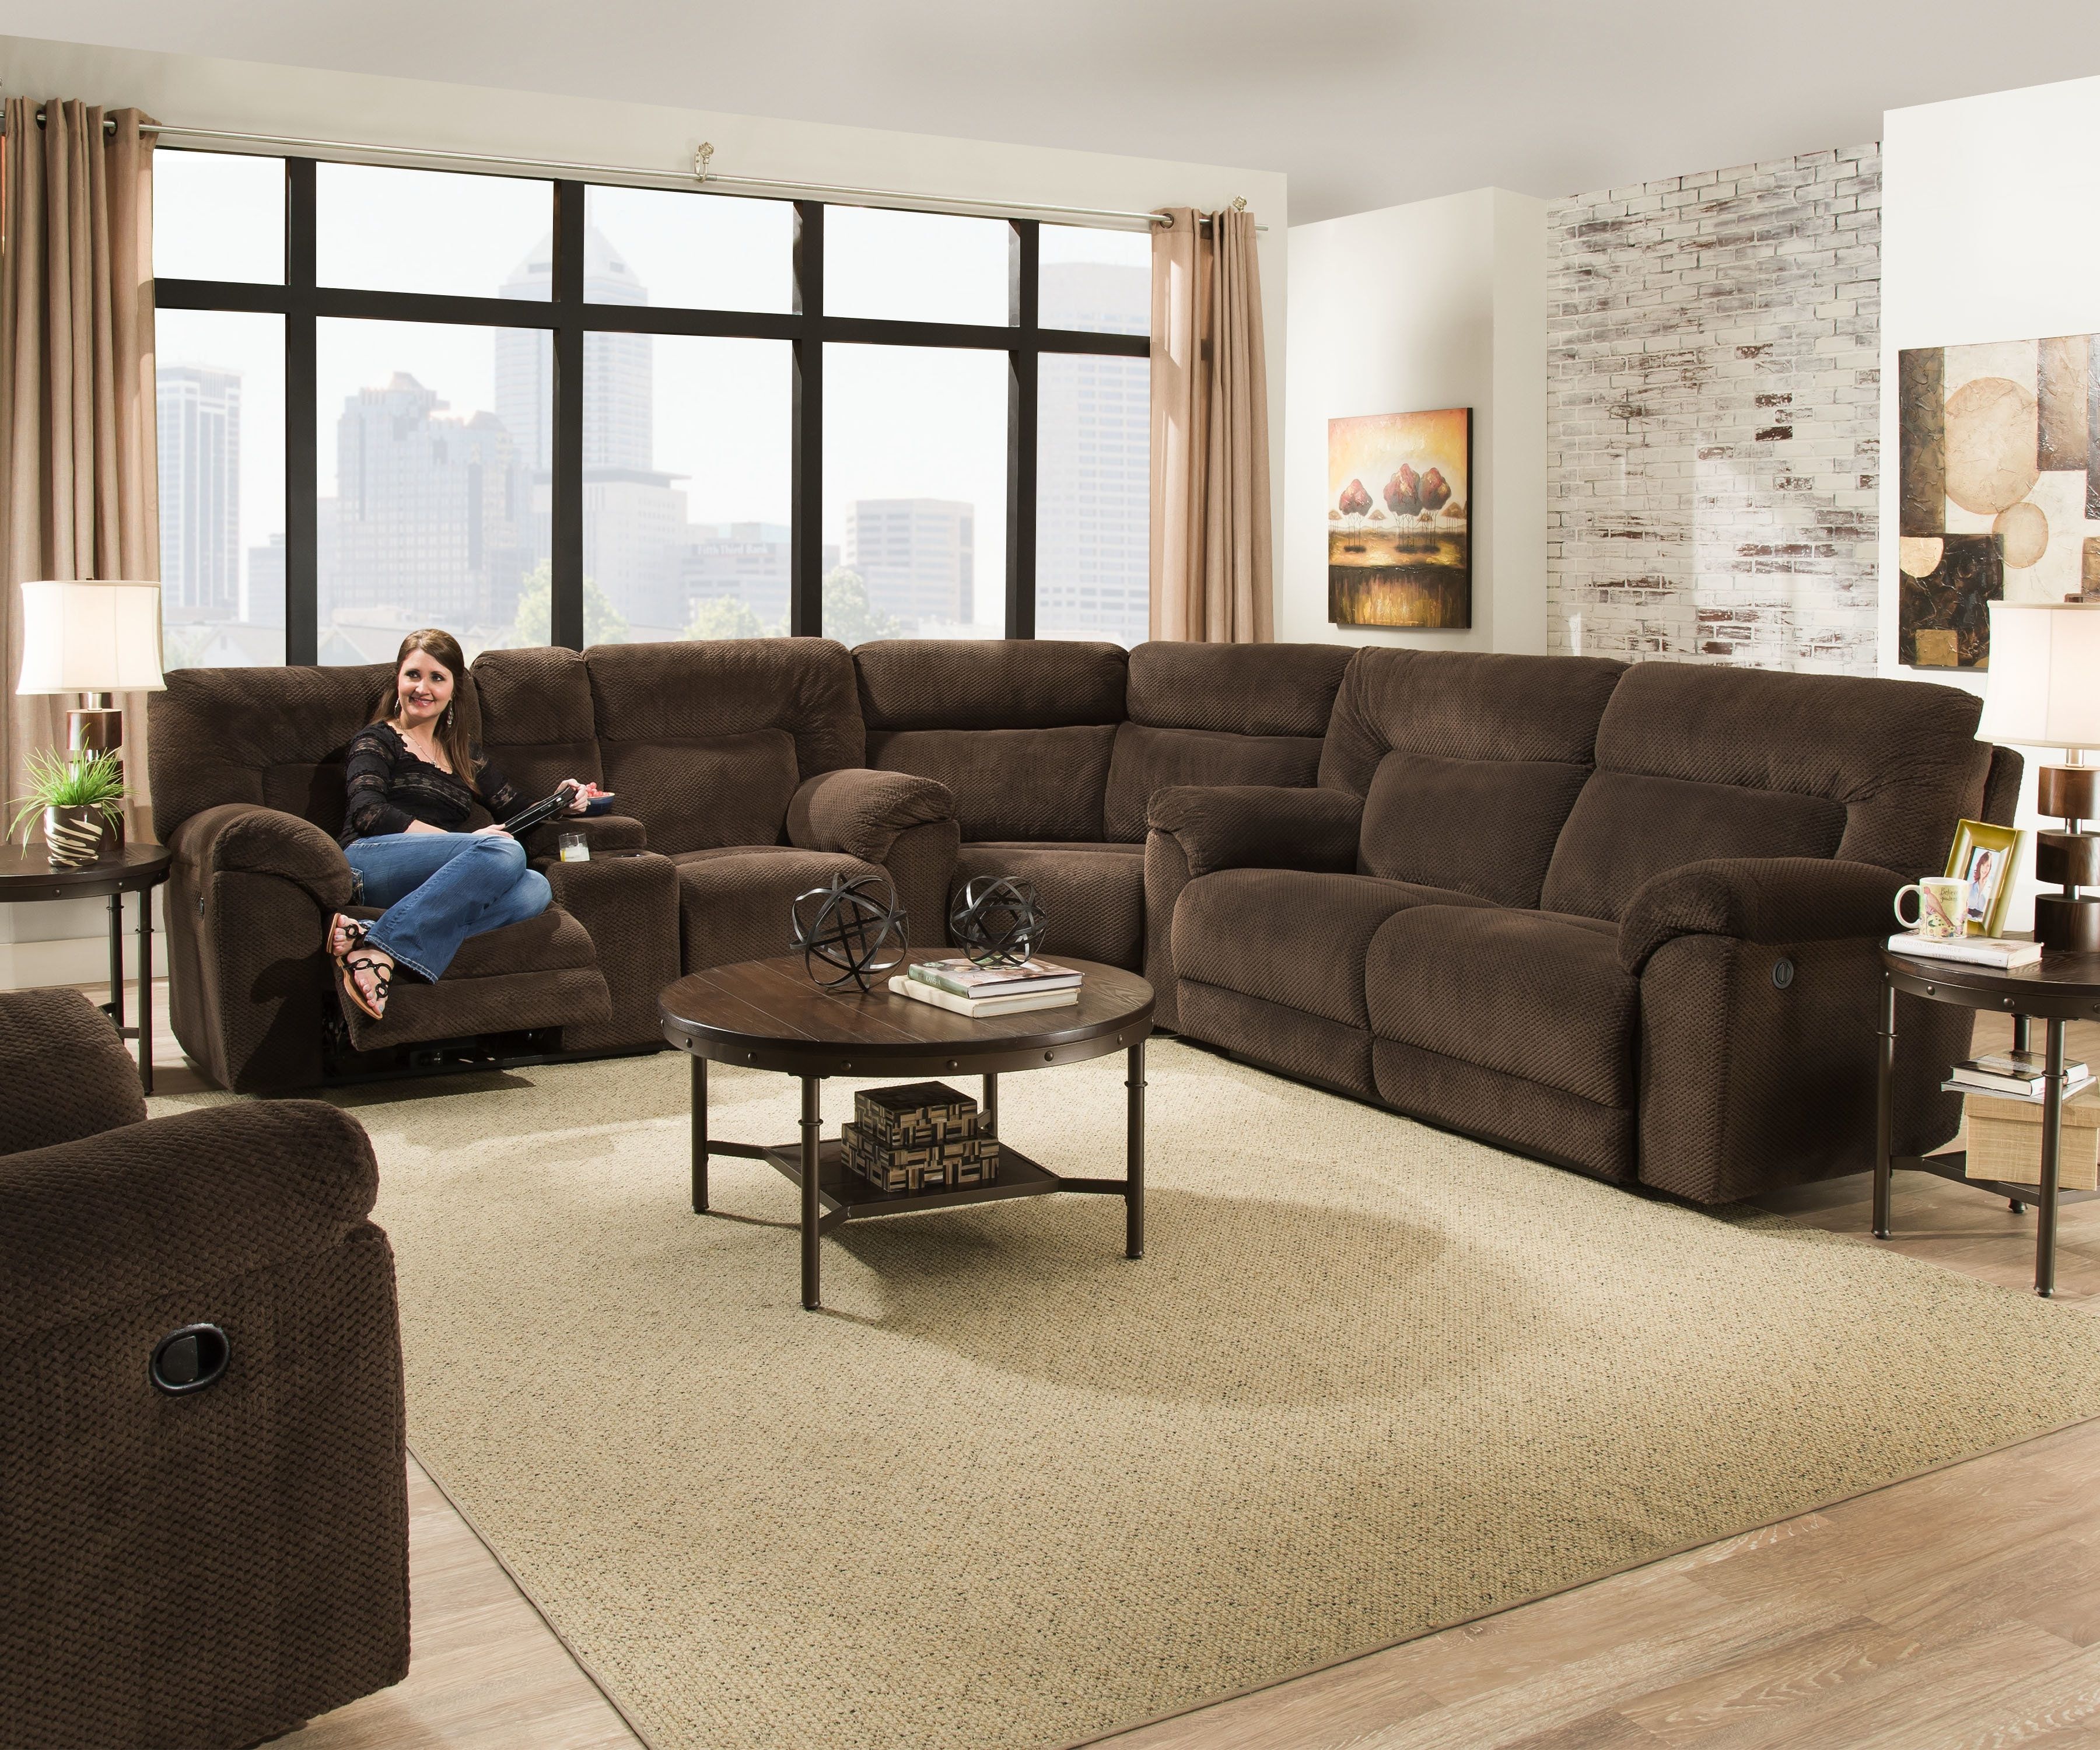 Darby Home Co Radcliff Reclining Sectional | Wayfair Throughout Karen 3 Piece Sectionals (View 9 of 25)